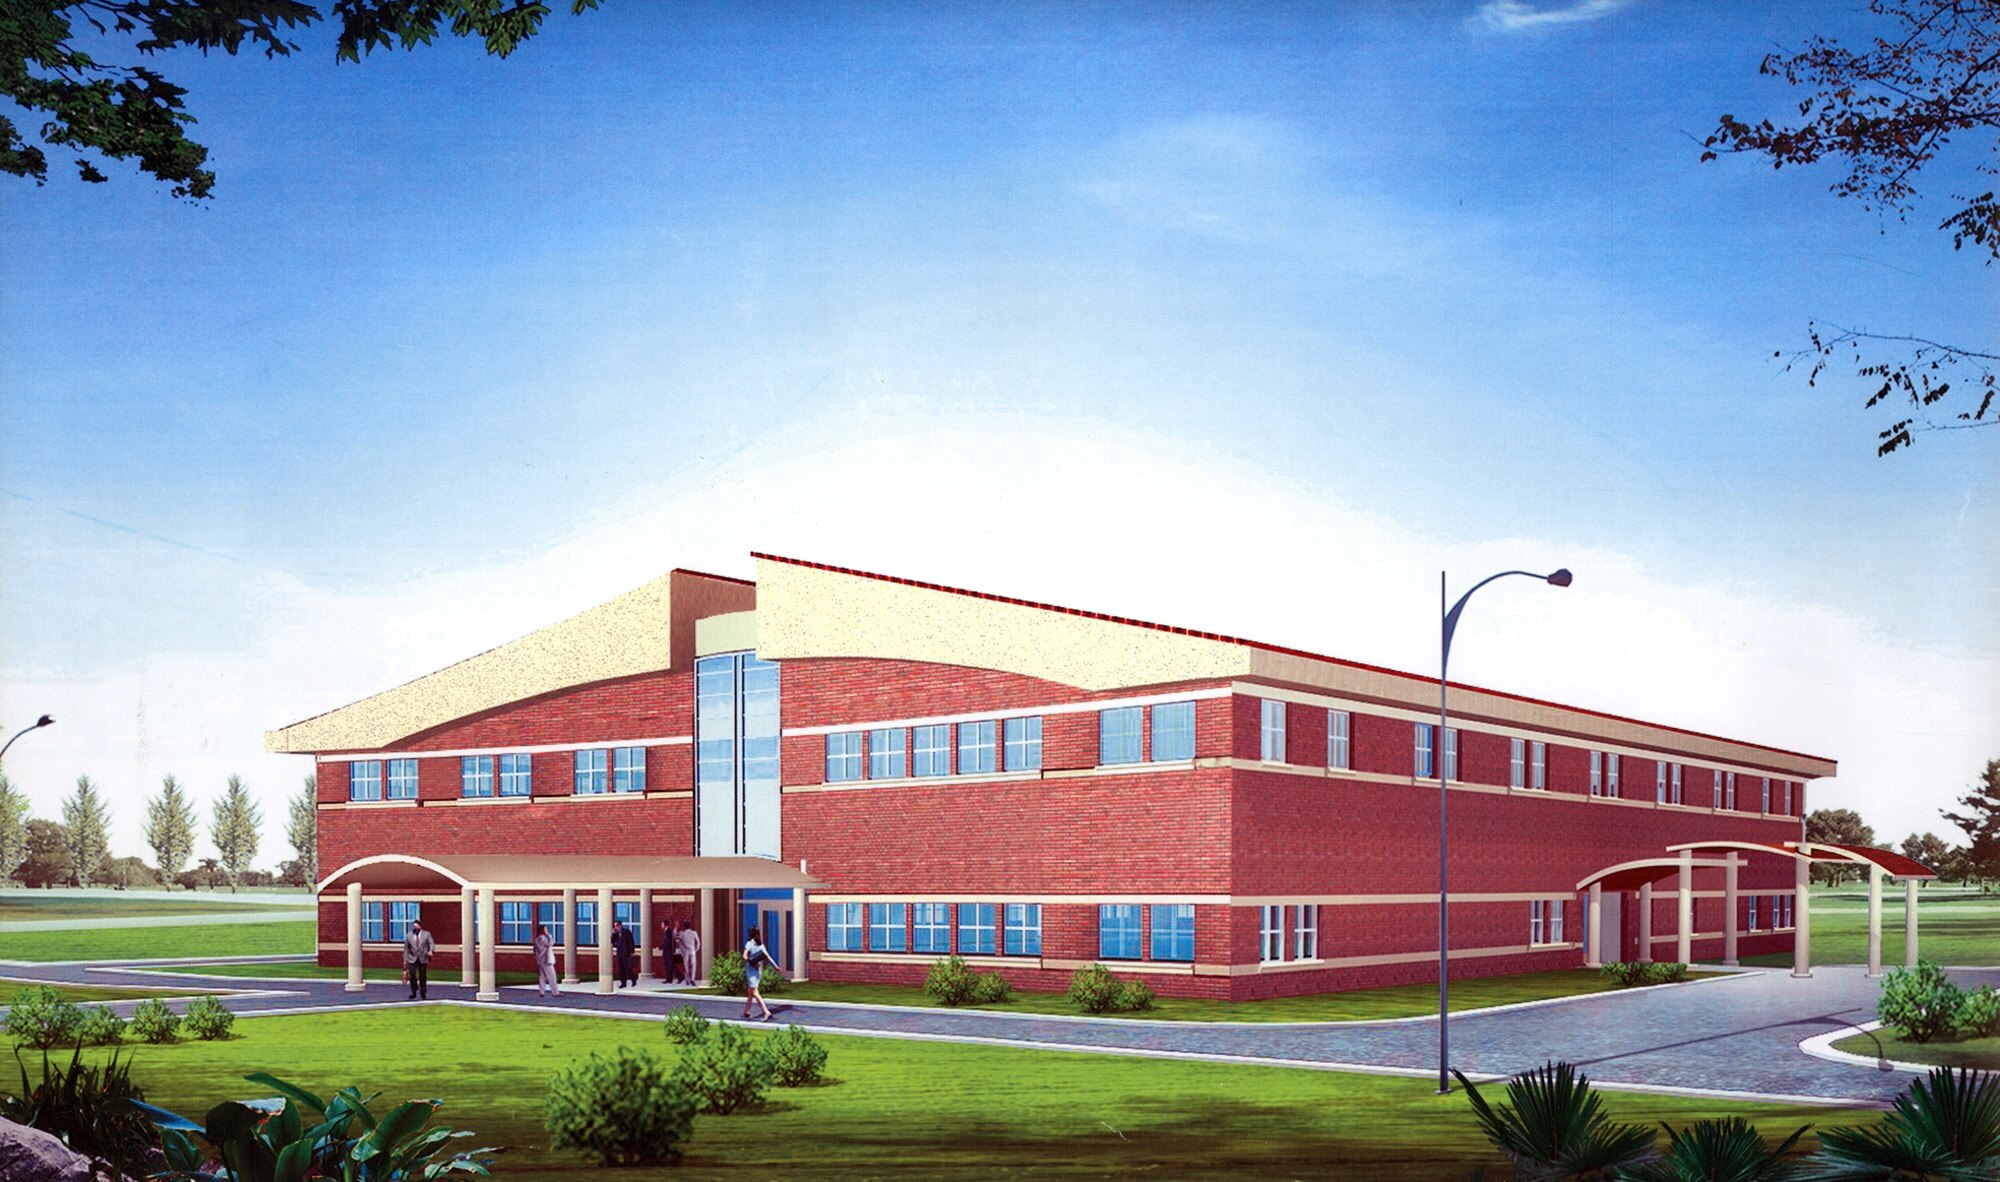 The artist's rendering shows the new 23,500-square foot facility for the 262nd Network Warfare Squadron Dec. 11. The $5.6 million construction project is scheduled for completion in October 2010. The mission of the 262nd NWS is to train citizen Airmen to provide network warfare capabilities to secure defense information networks and provide full-spectrum cyberspace options to the State of Washington, Air Force Space Command and 24th Air Force. The 262nd NWS is part of the 688th Information Operations Wing at Lackland Air Force Base, Texas. (U.S. Air Force photo/Abner Guzman)